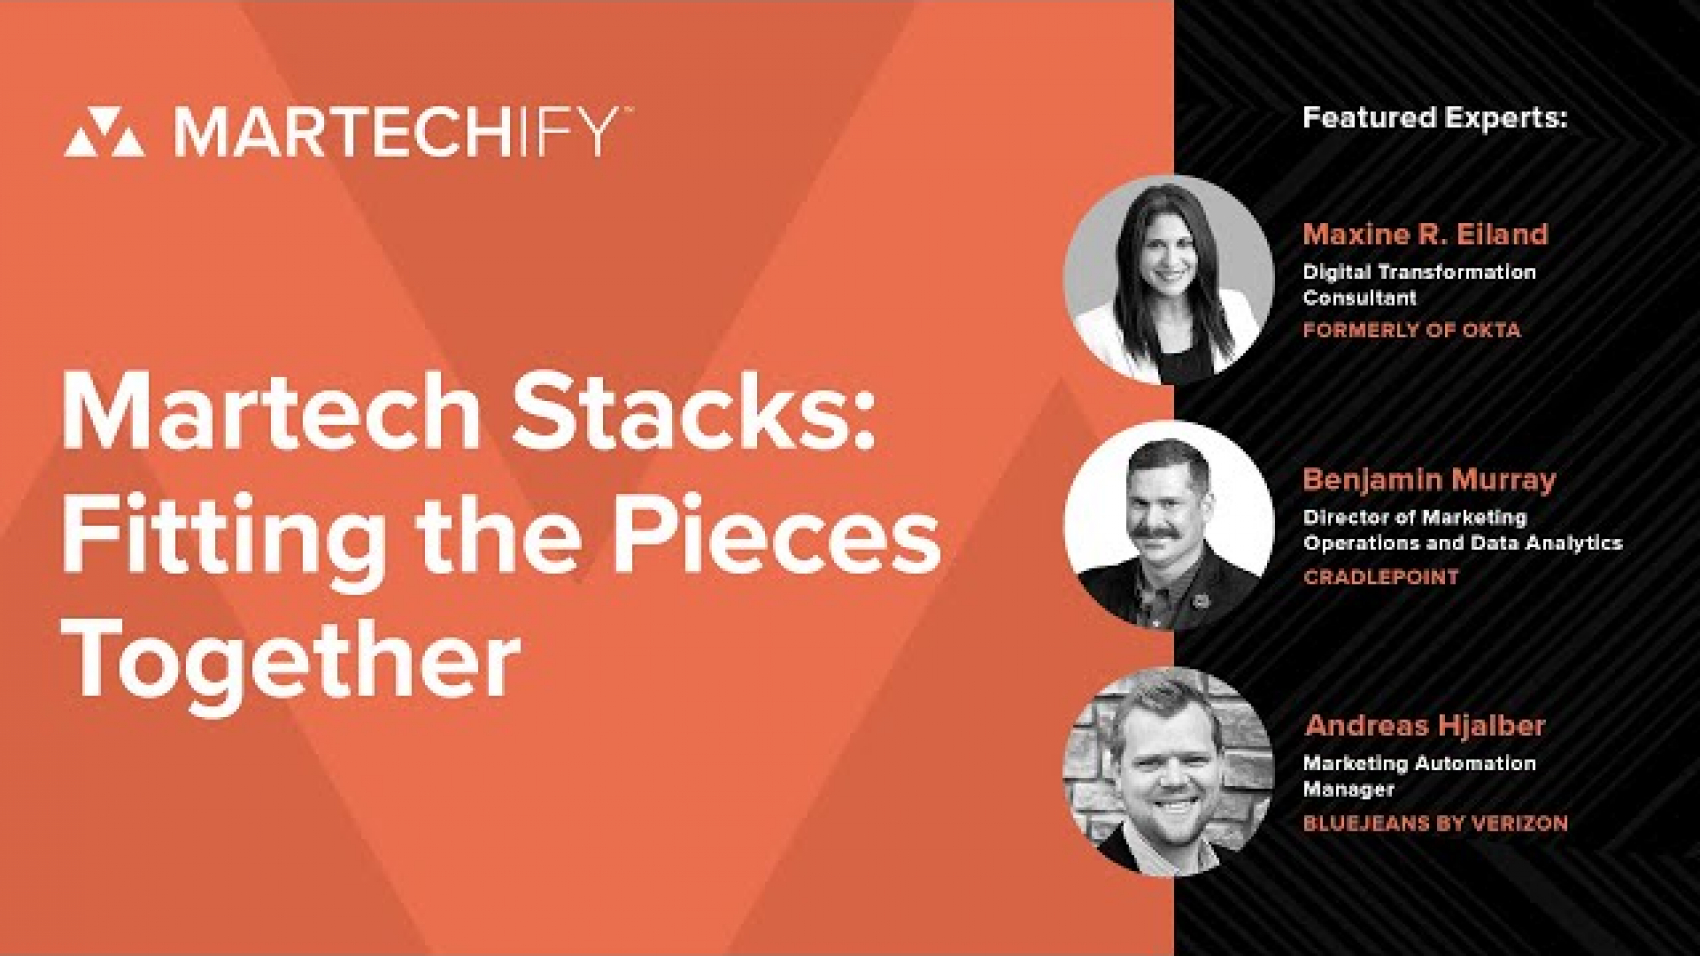 Martech Stacks: Fitting the Pieces Together